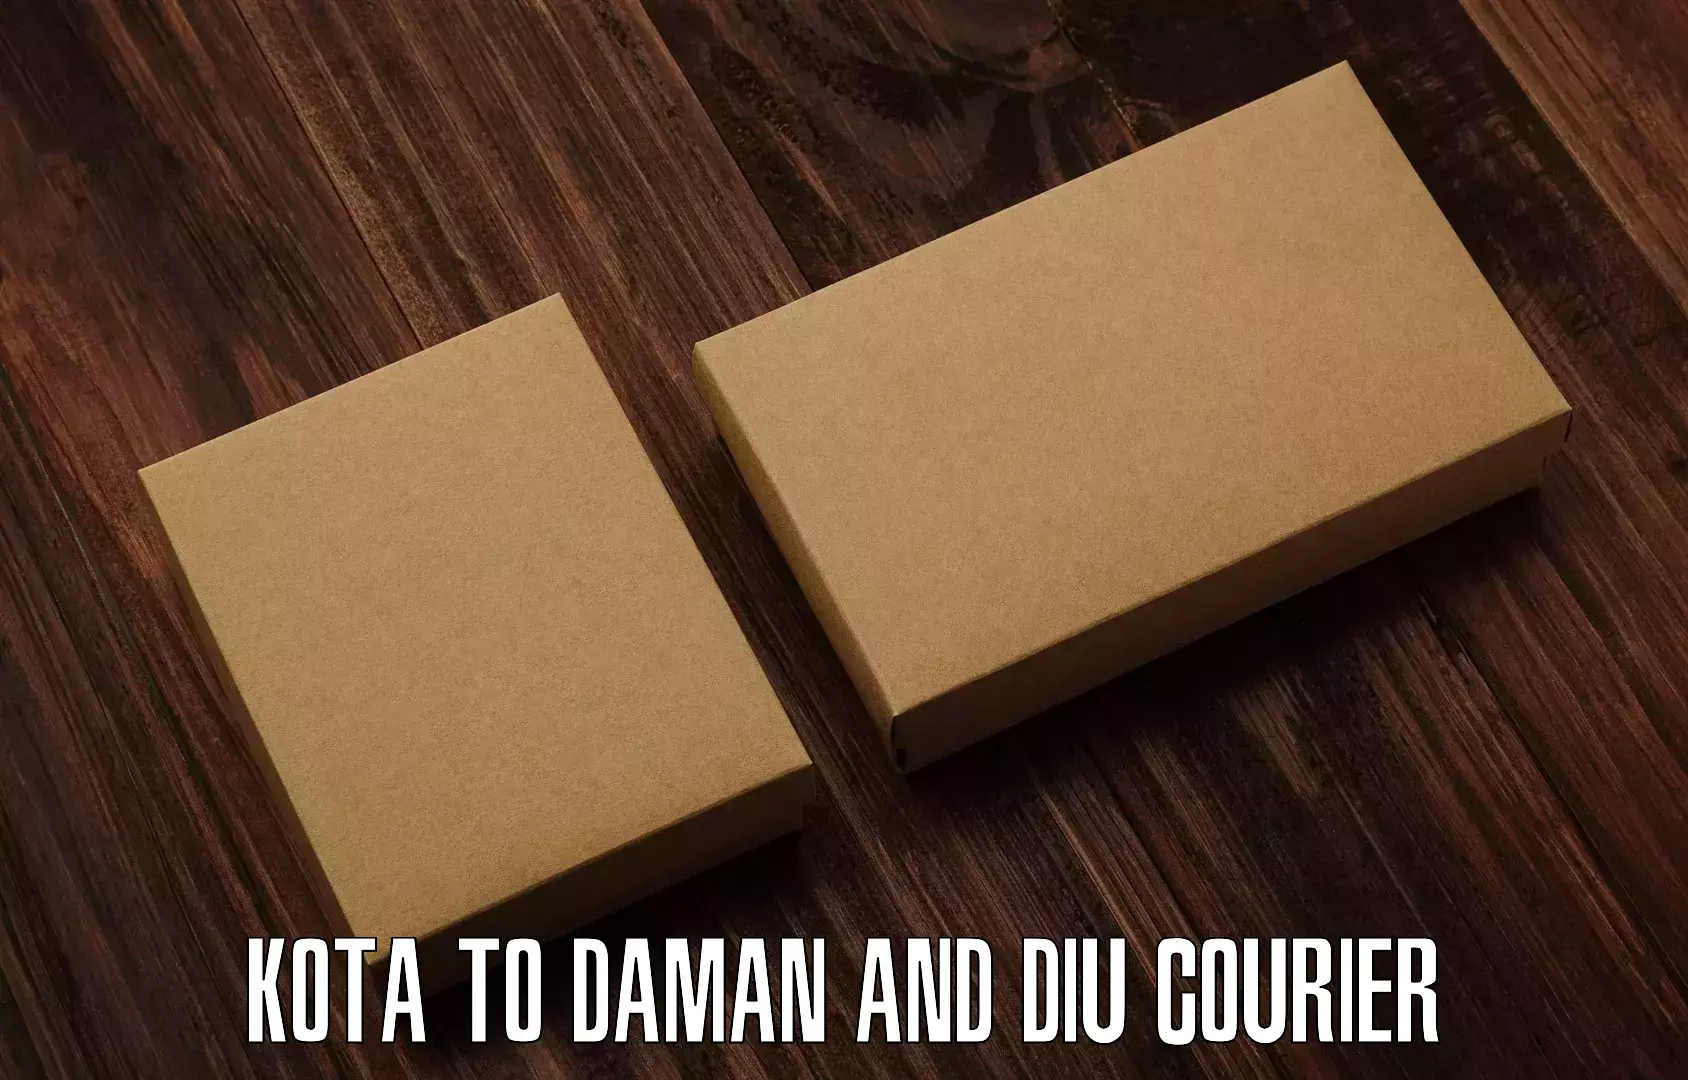 Subscription-based courier Kota to Daman